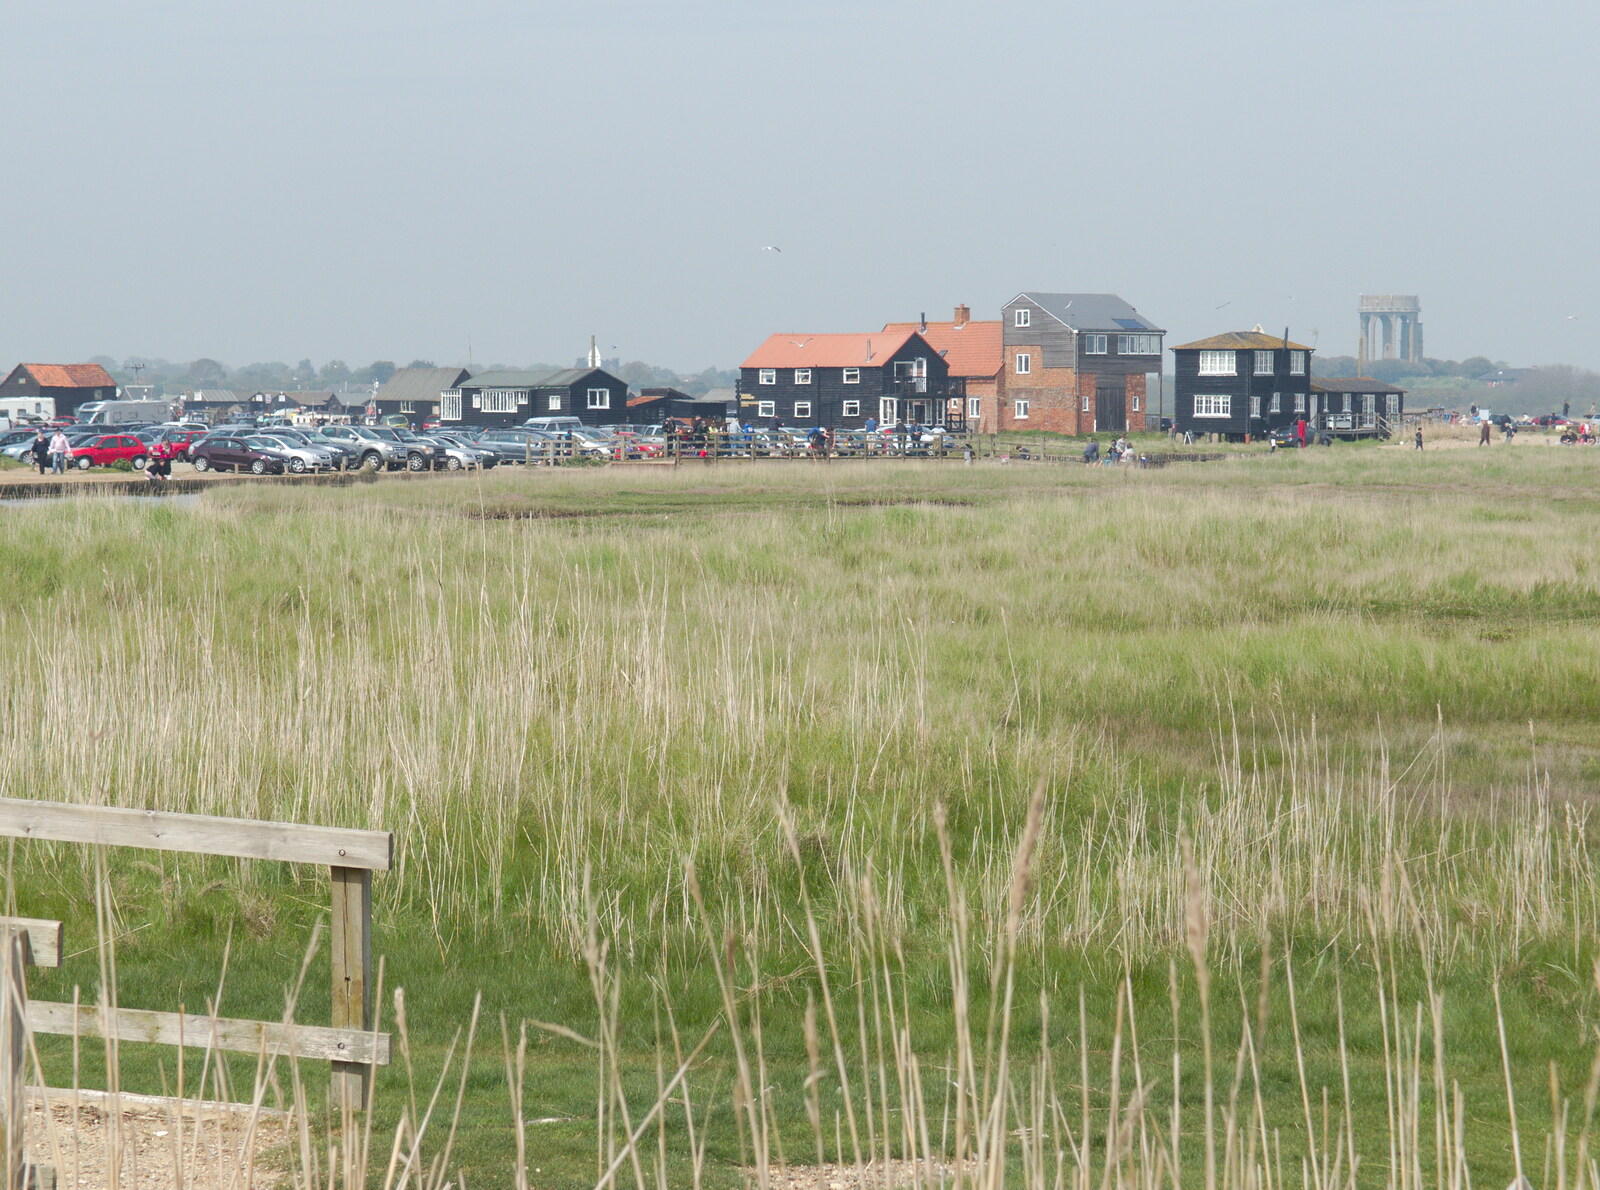 Buildings by the river at Walberswick from Life's A Windy Beach, Walberswick, Suffolk - 5th May 2014